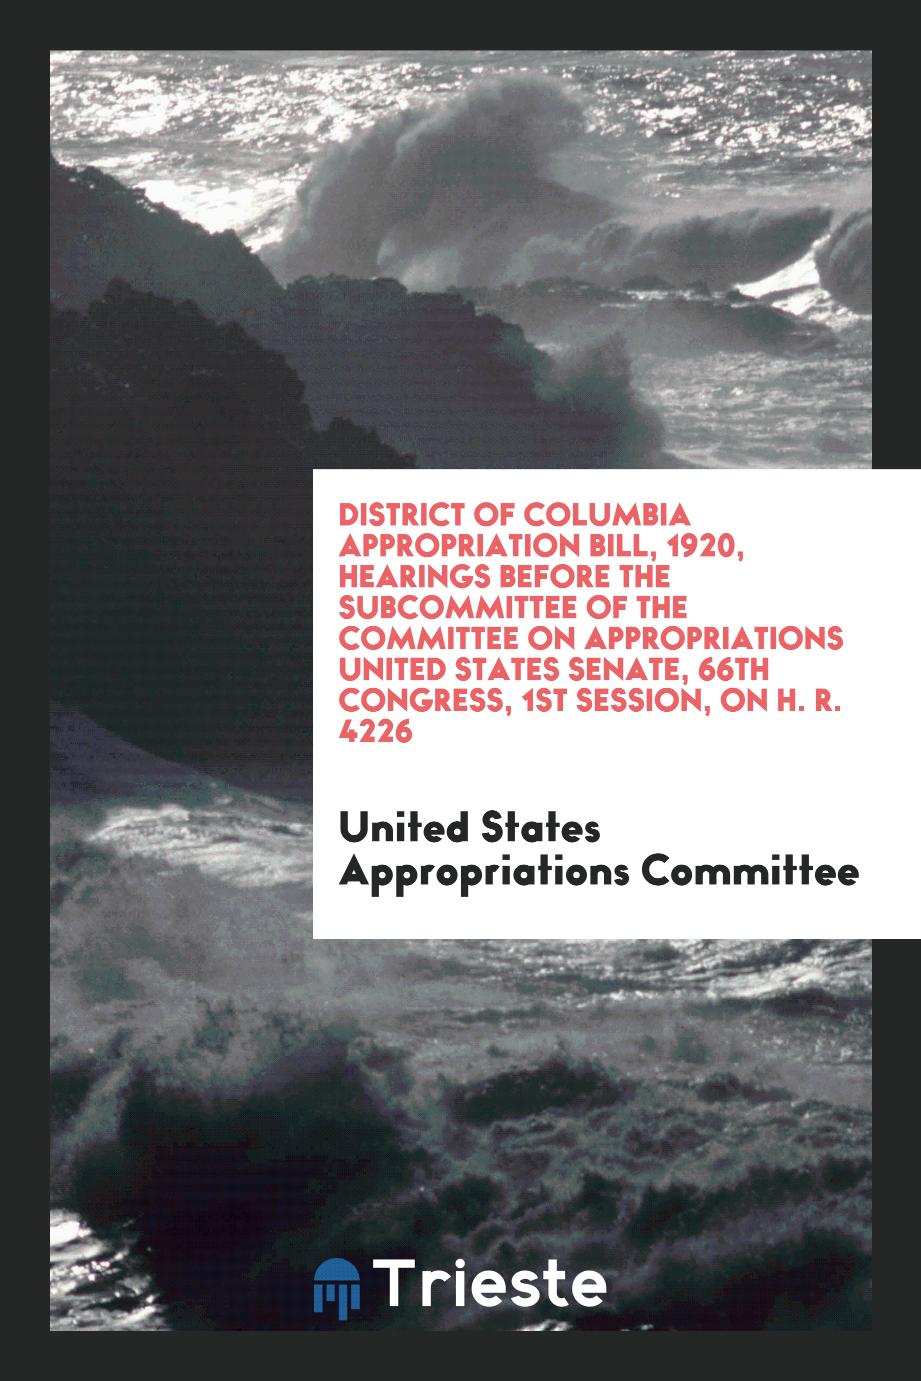 District of Columbia Appropriation Bill, 1920, Hearings Before the subcommittee of the committee on appropriations United States senate, 66th congress, 1st session, on H. R. 4226